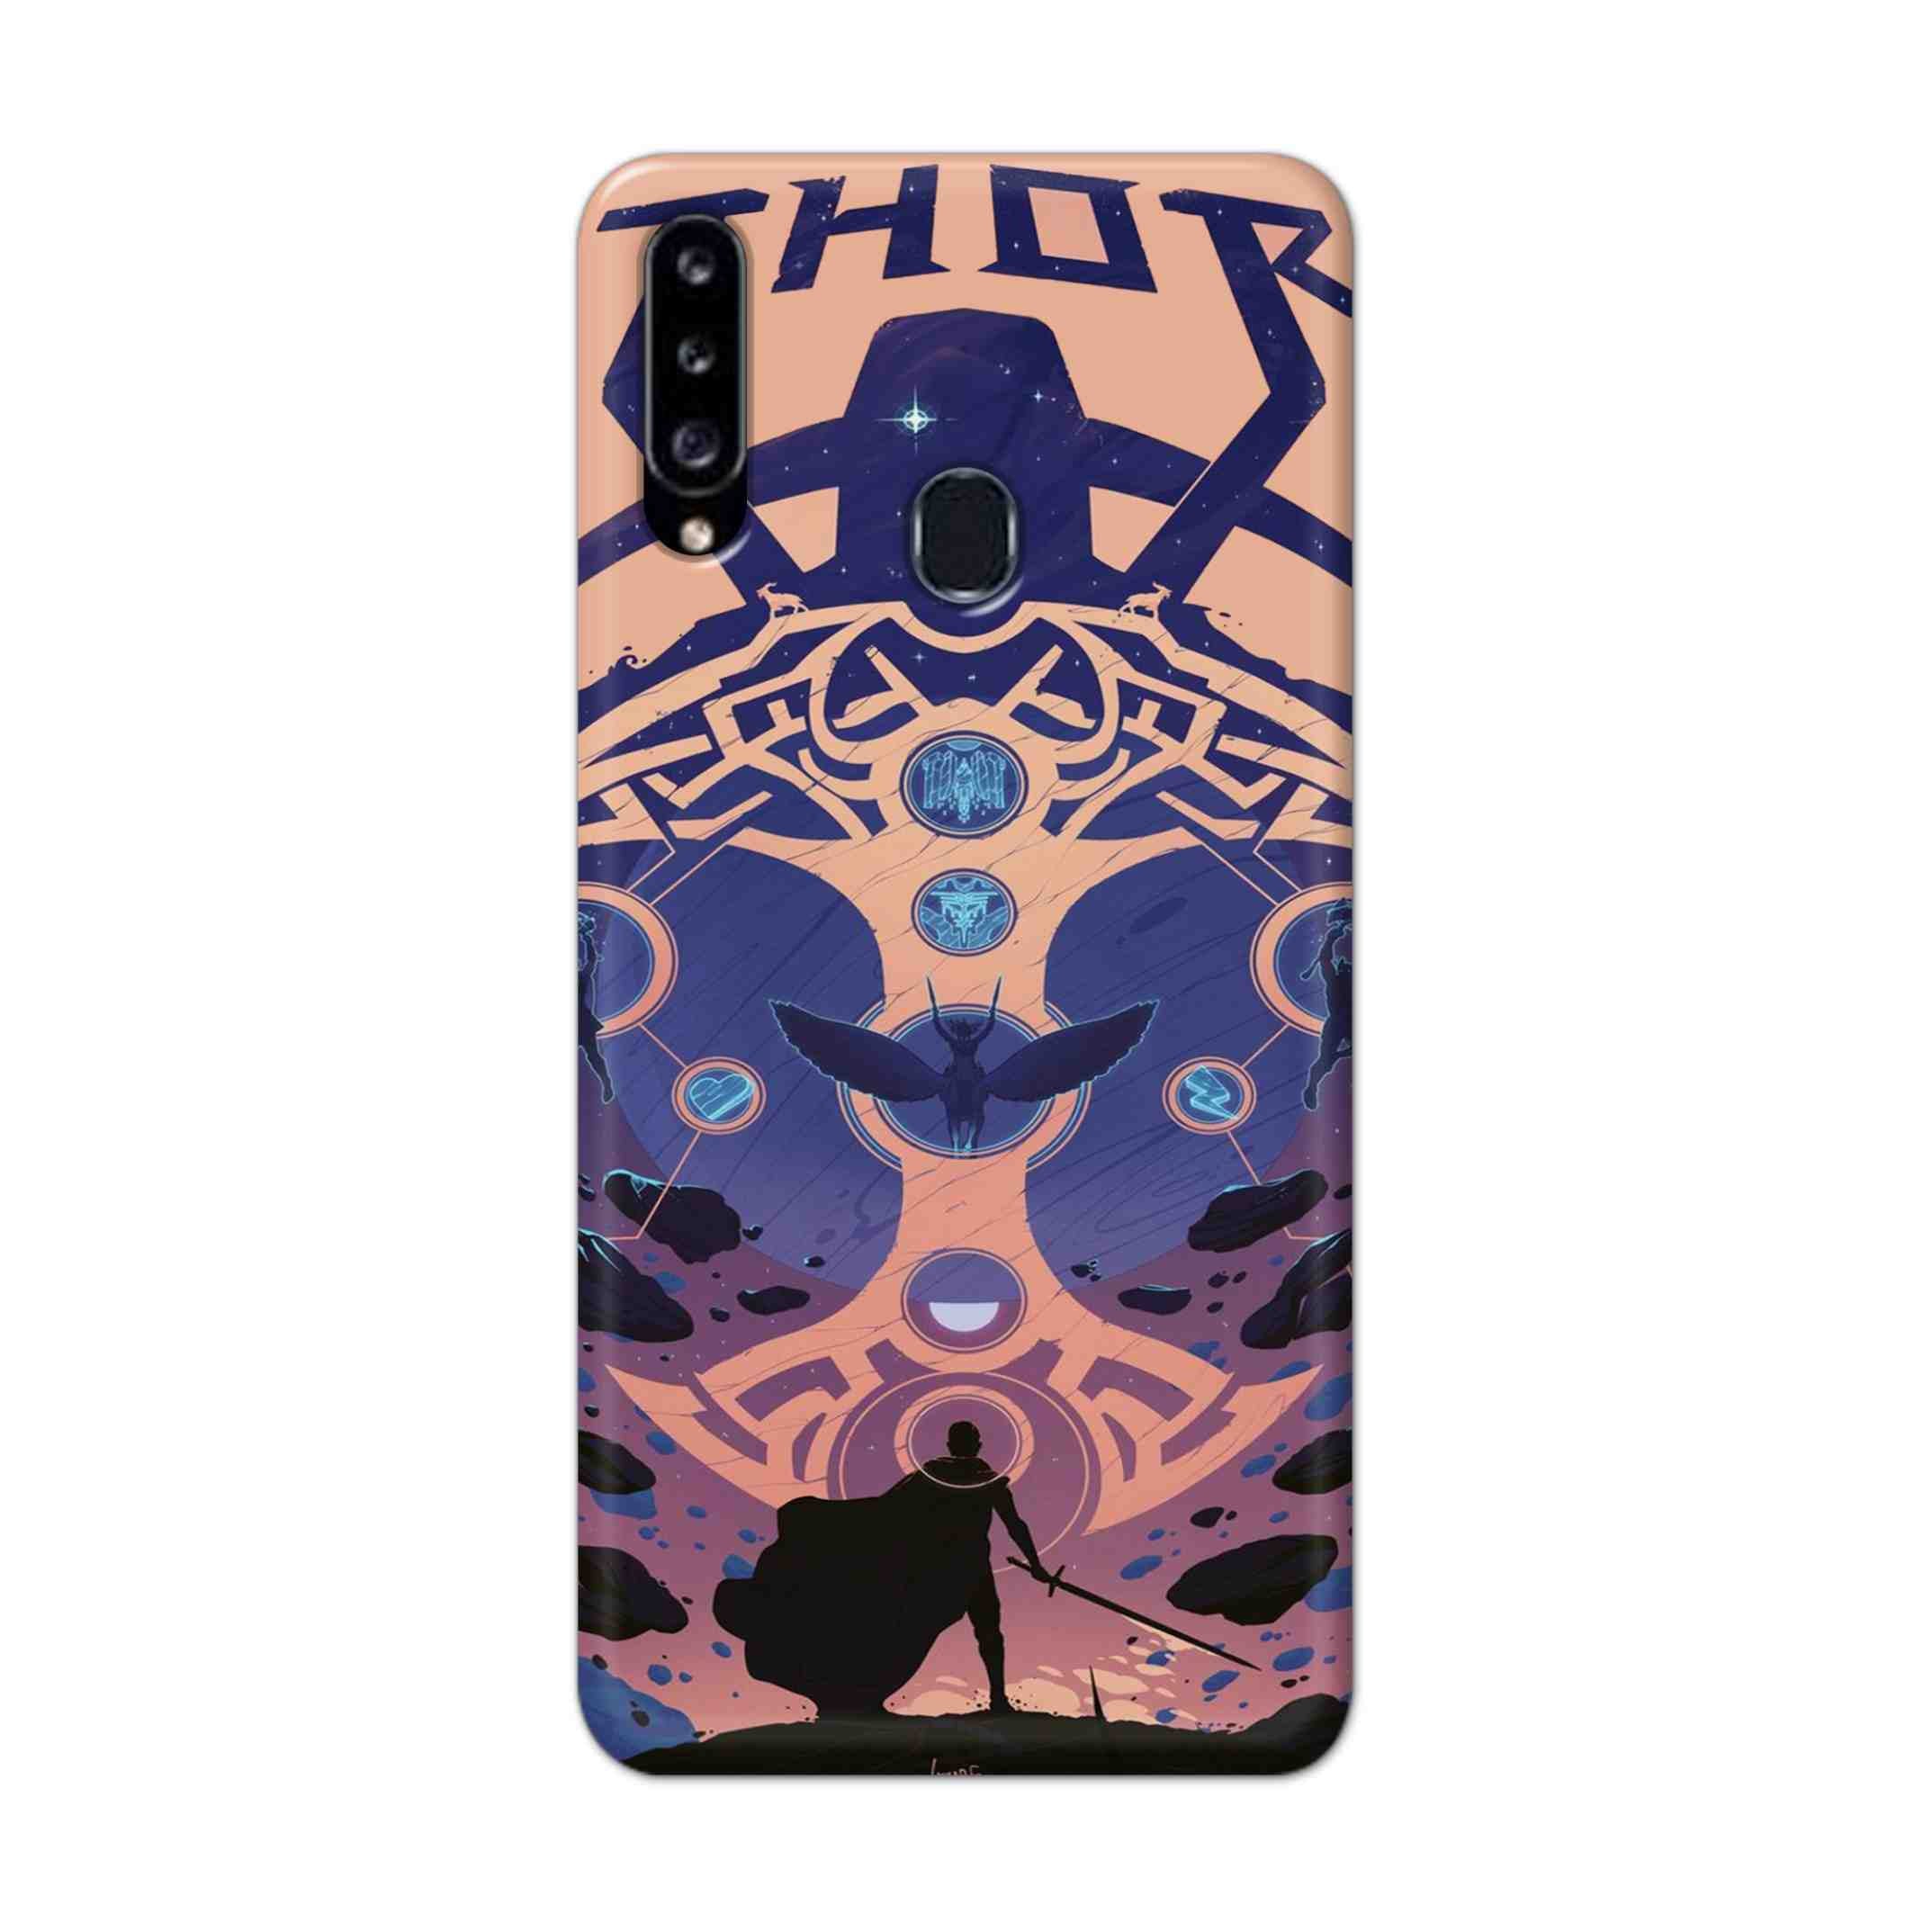 Buy Thor Hard Back Mobile Phone Case Cover For Samsung Galaxy A21 Online